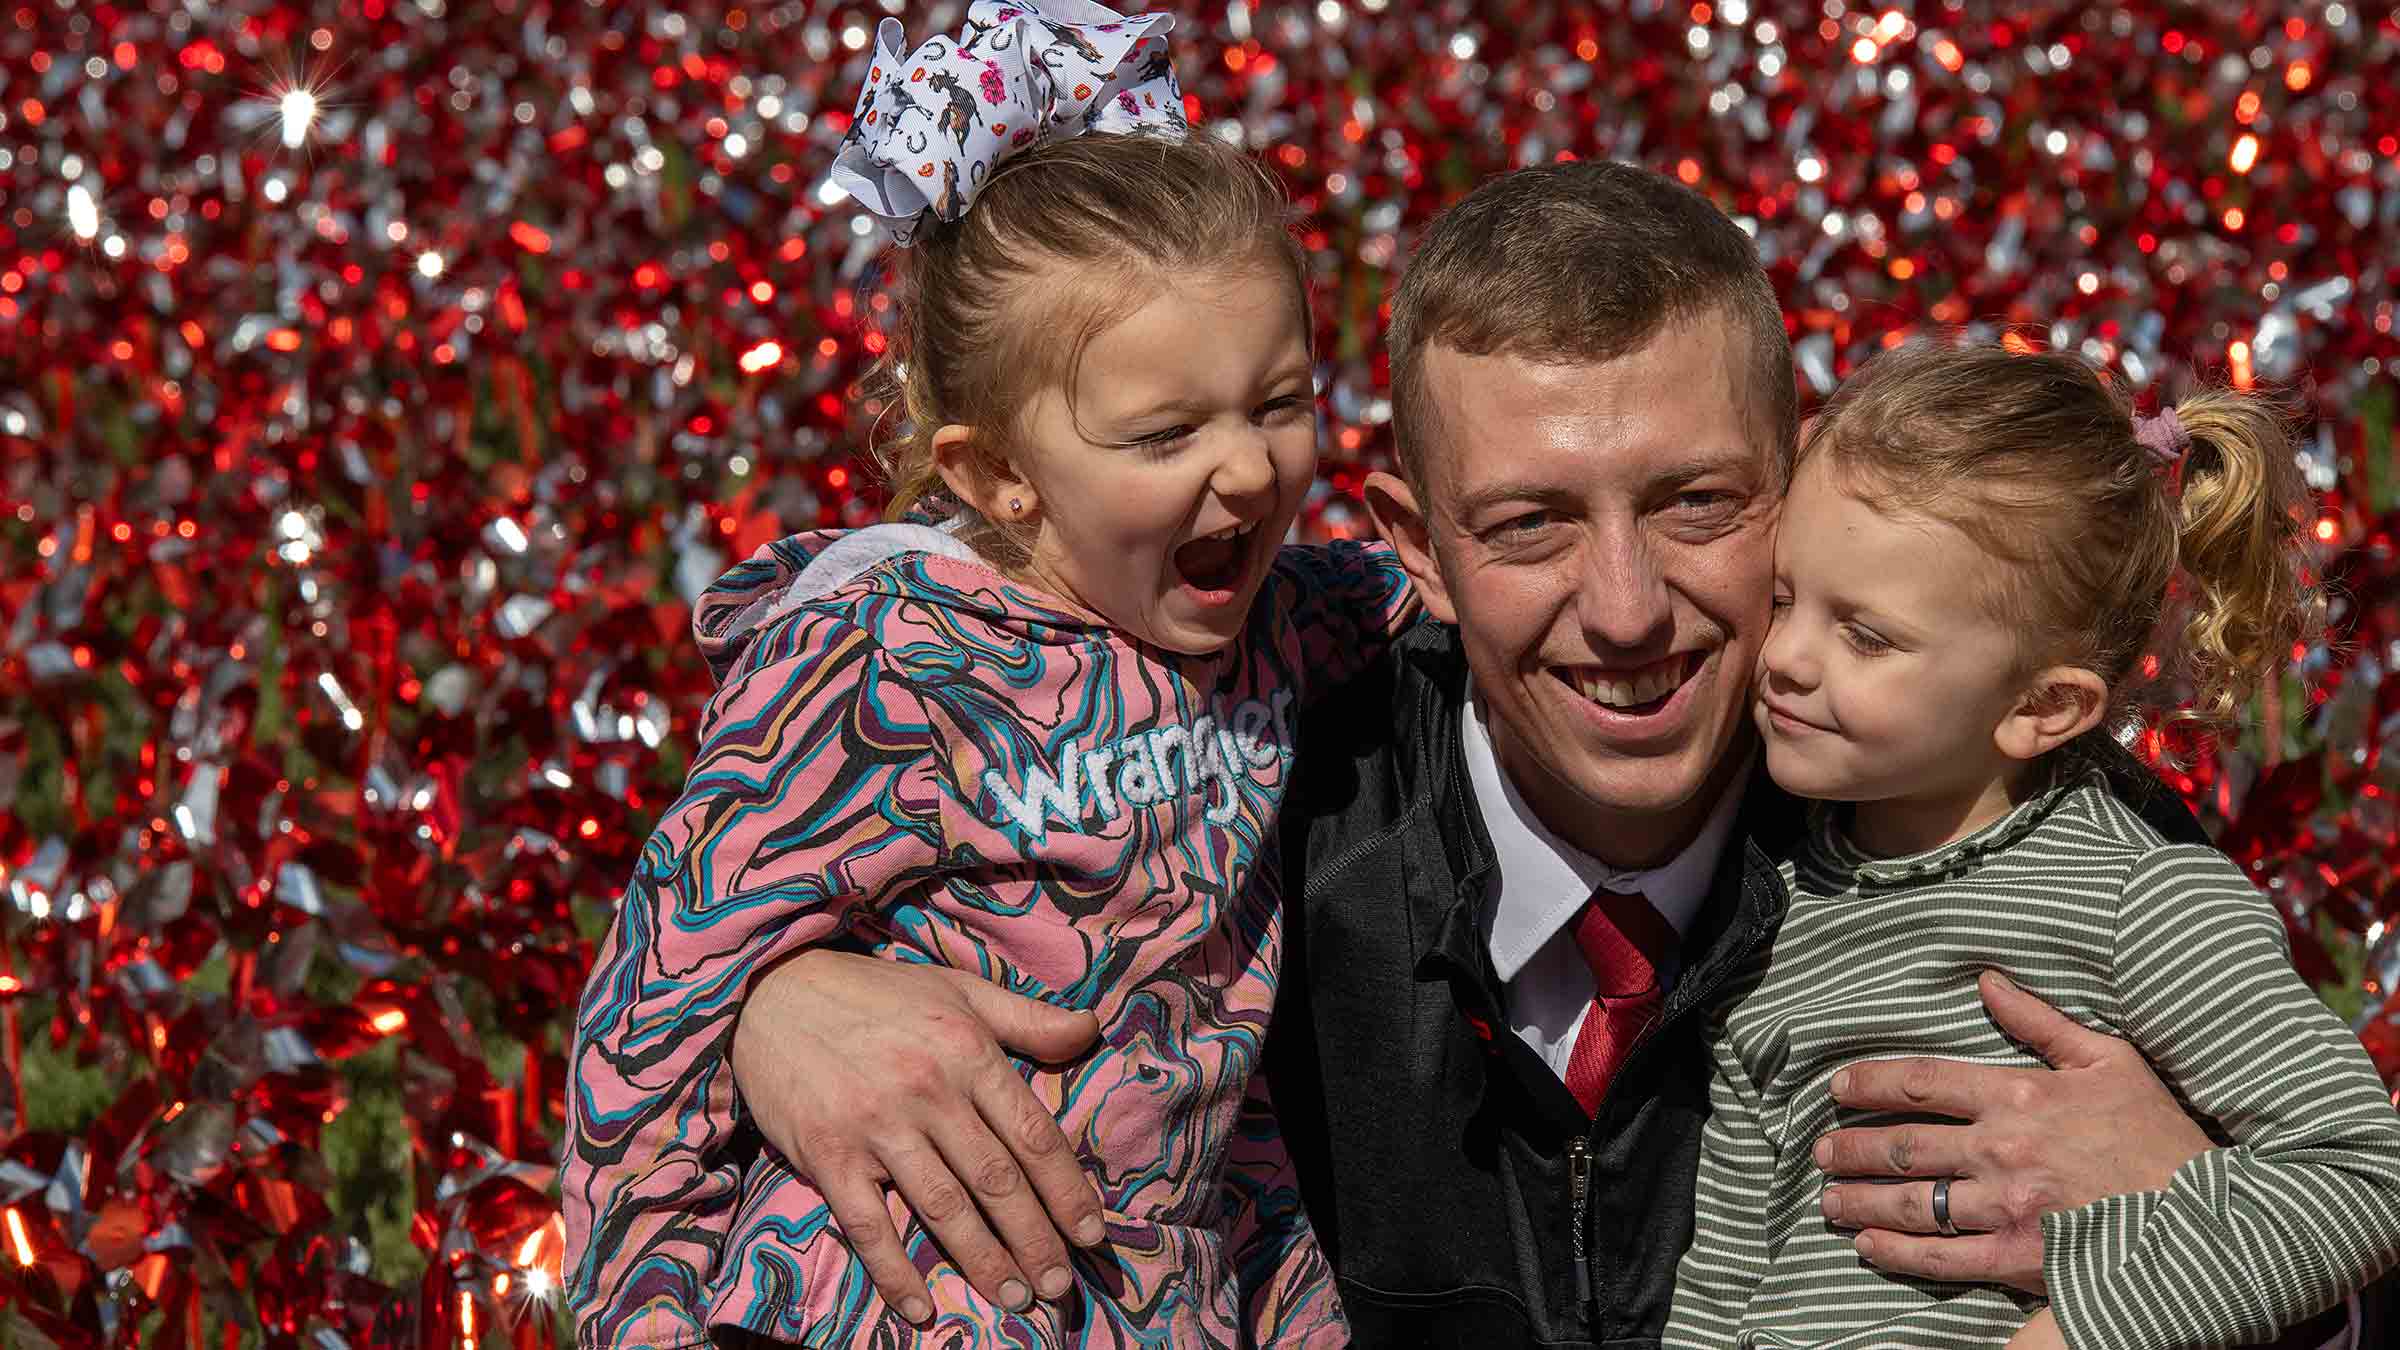 Justin Shupert hugging his two daughters with pinwheels on the background